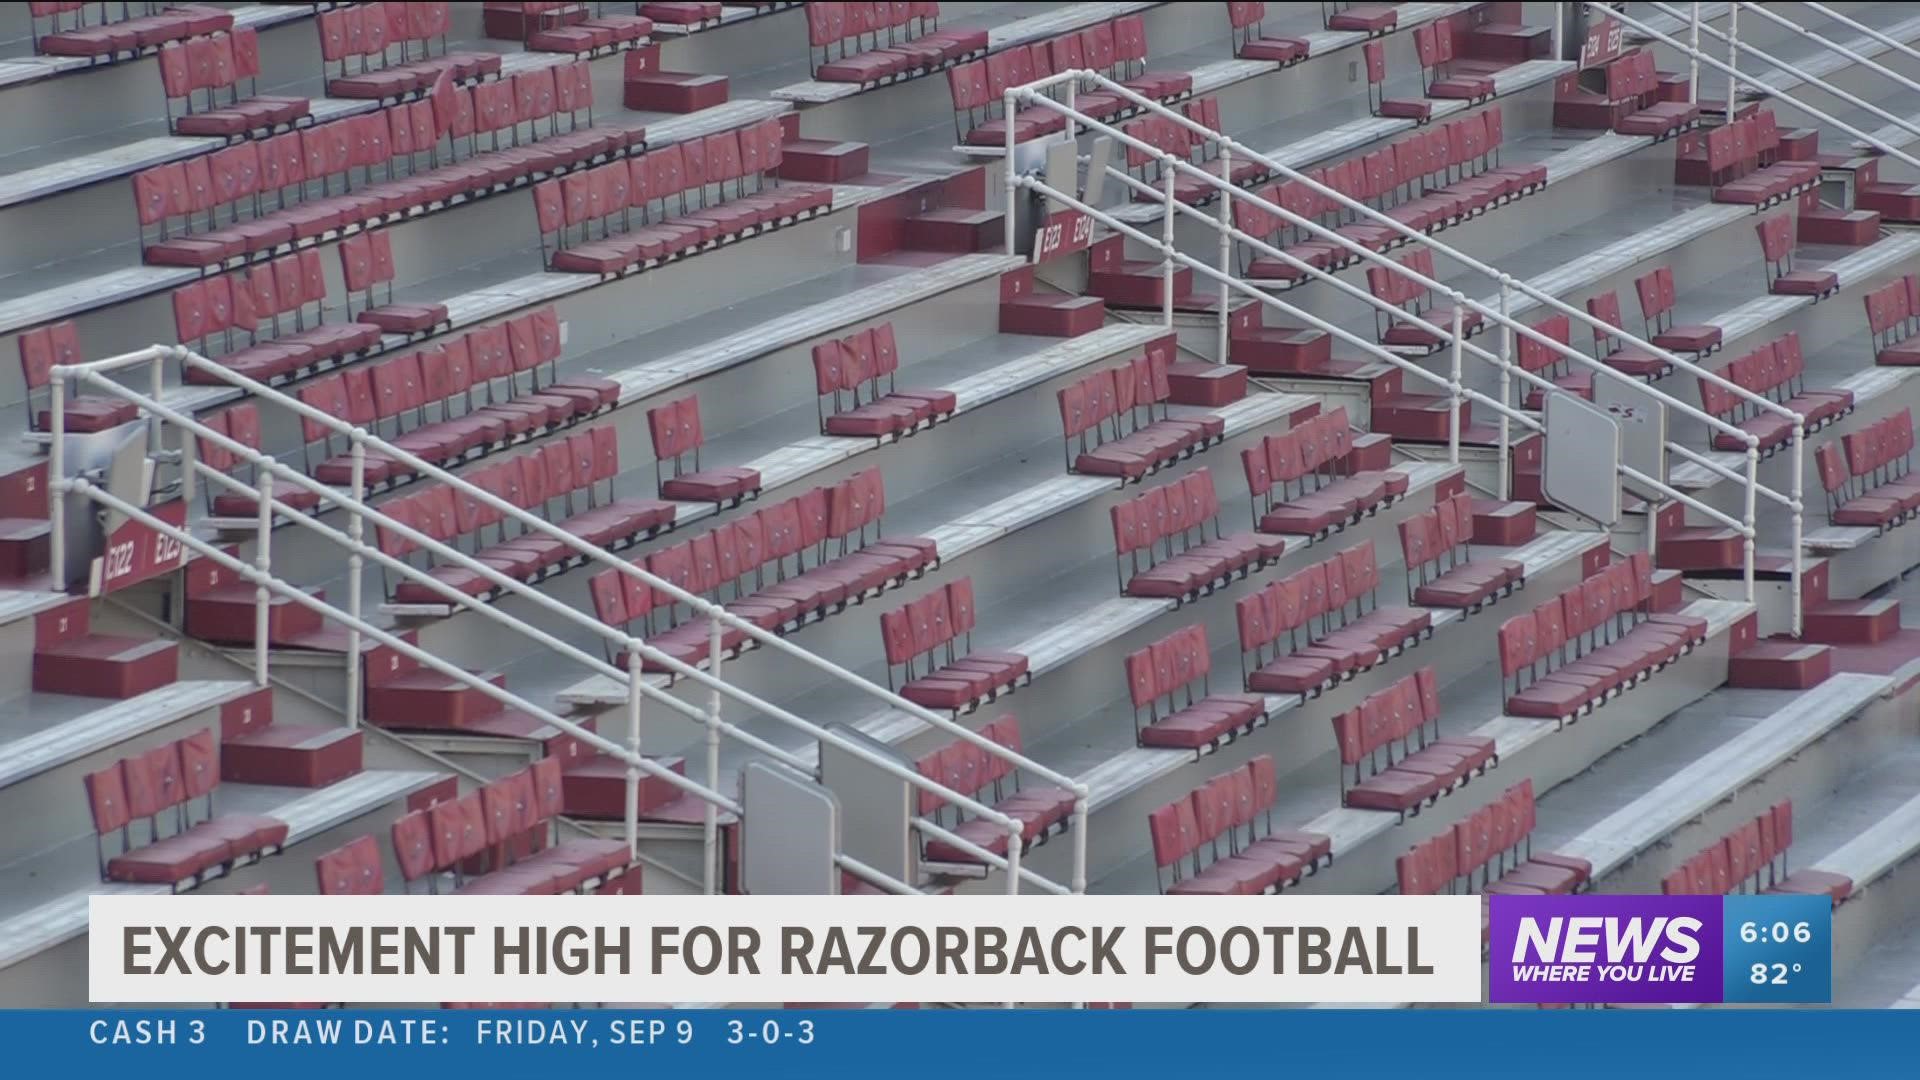 The University of Arkansas has made changes to make entry into Razorback Stadium easier for those attending football games.